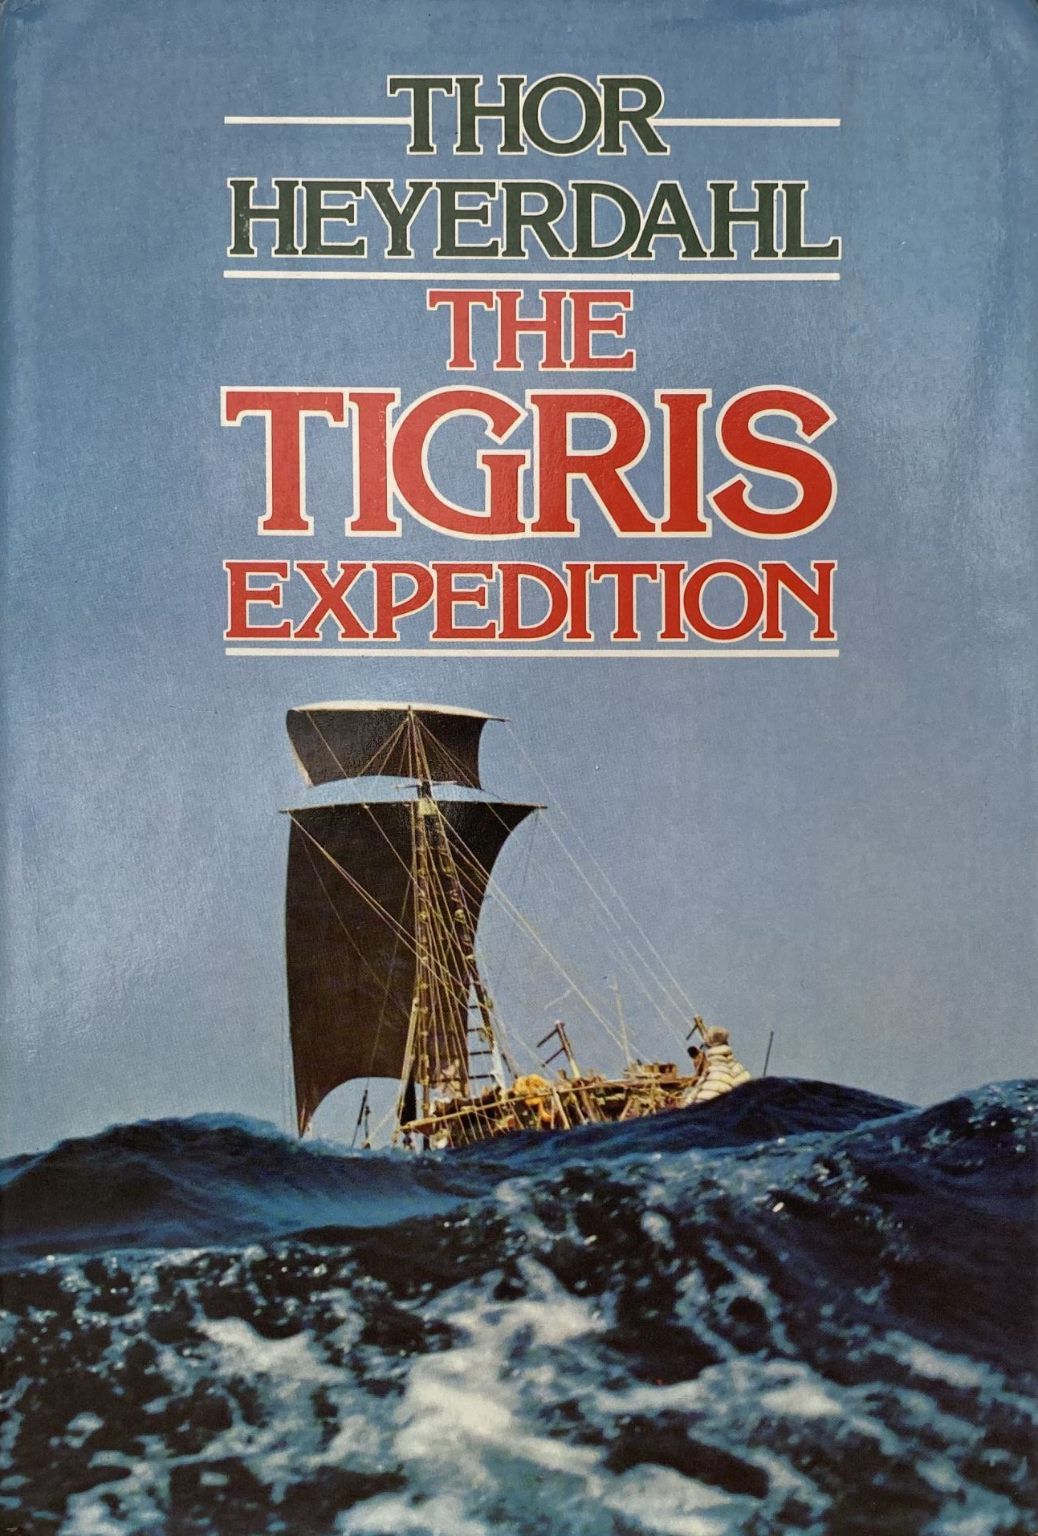 THE TIGRIS EXPEDITION